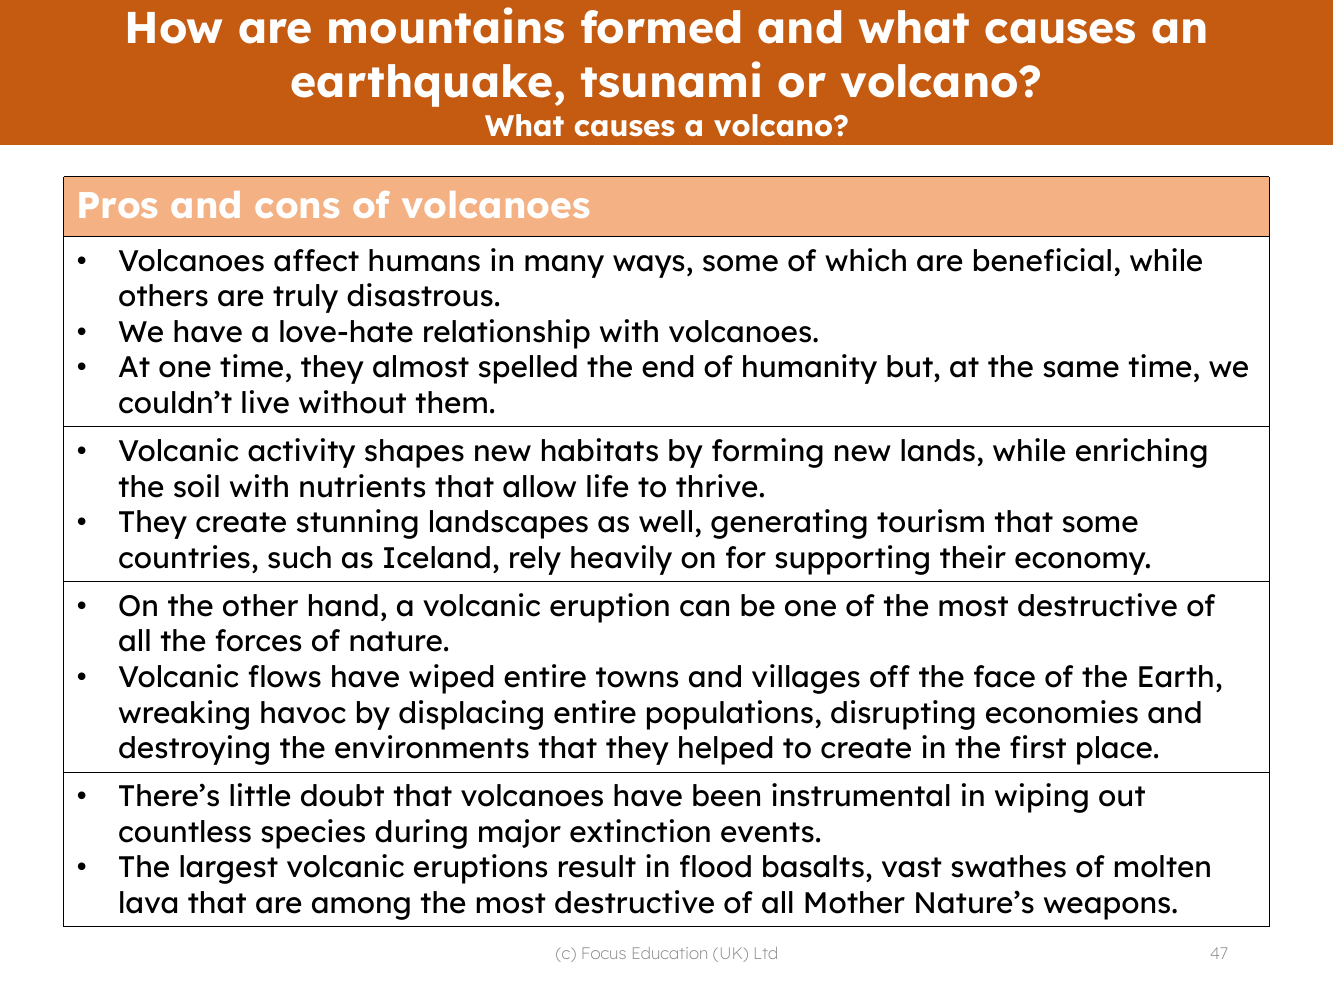 Pros and cons of volcanoes - Info sheet